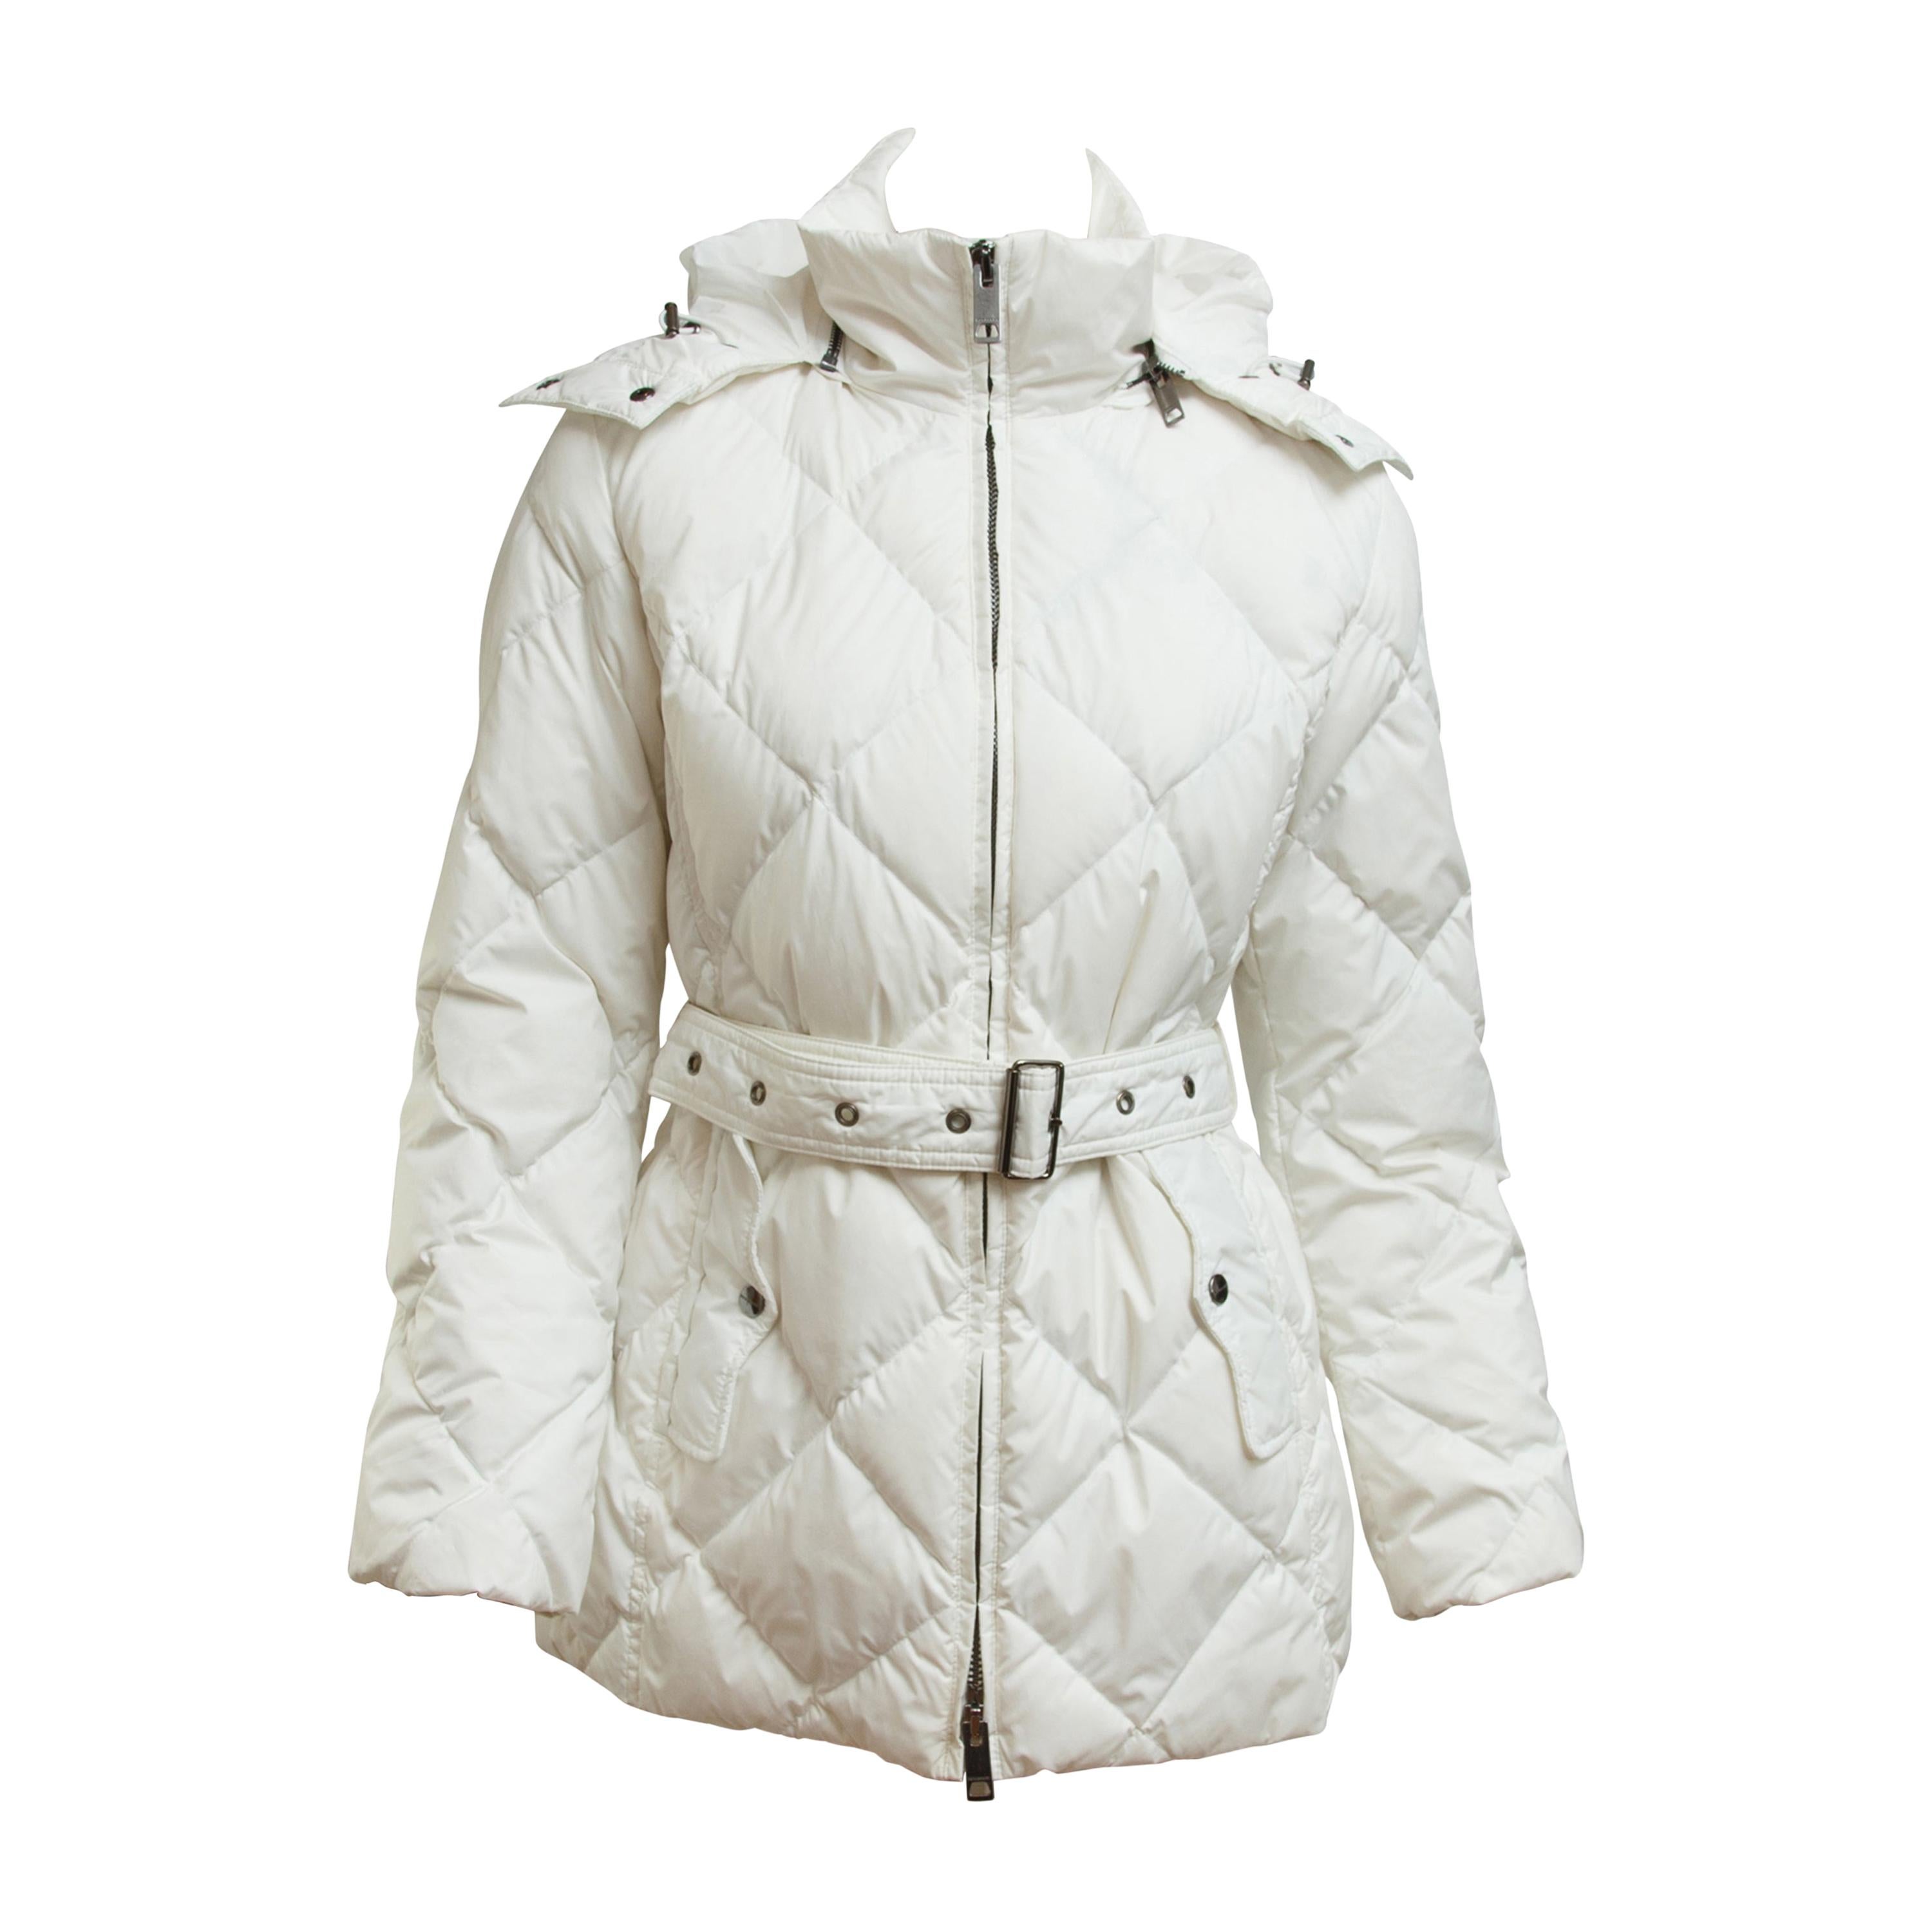 Burberry London White Quilted Puffer 1stDibs | white burberry jacket, burberry white puffer jacket, burberry puffer jacket white